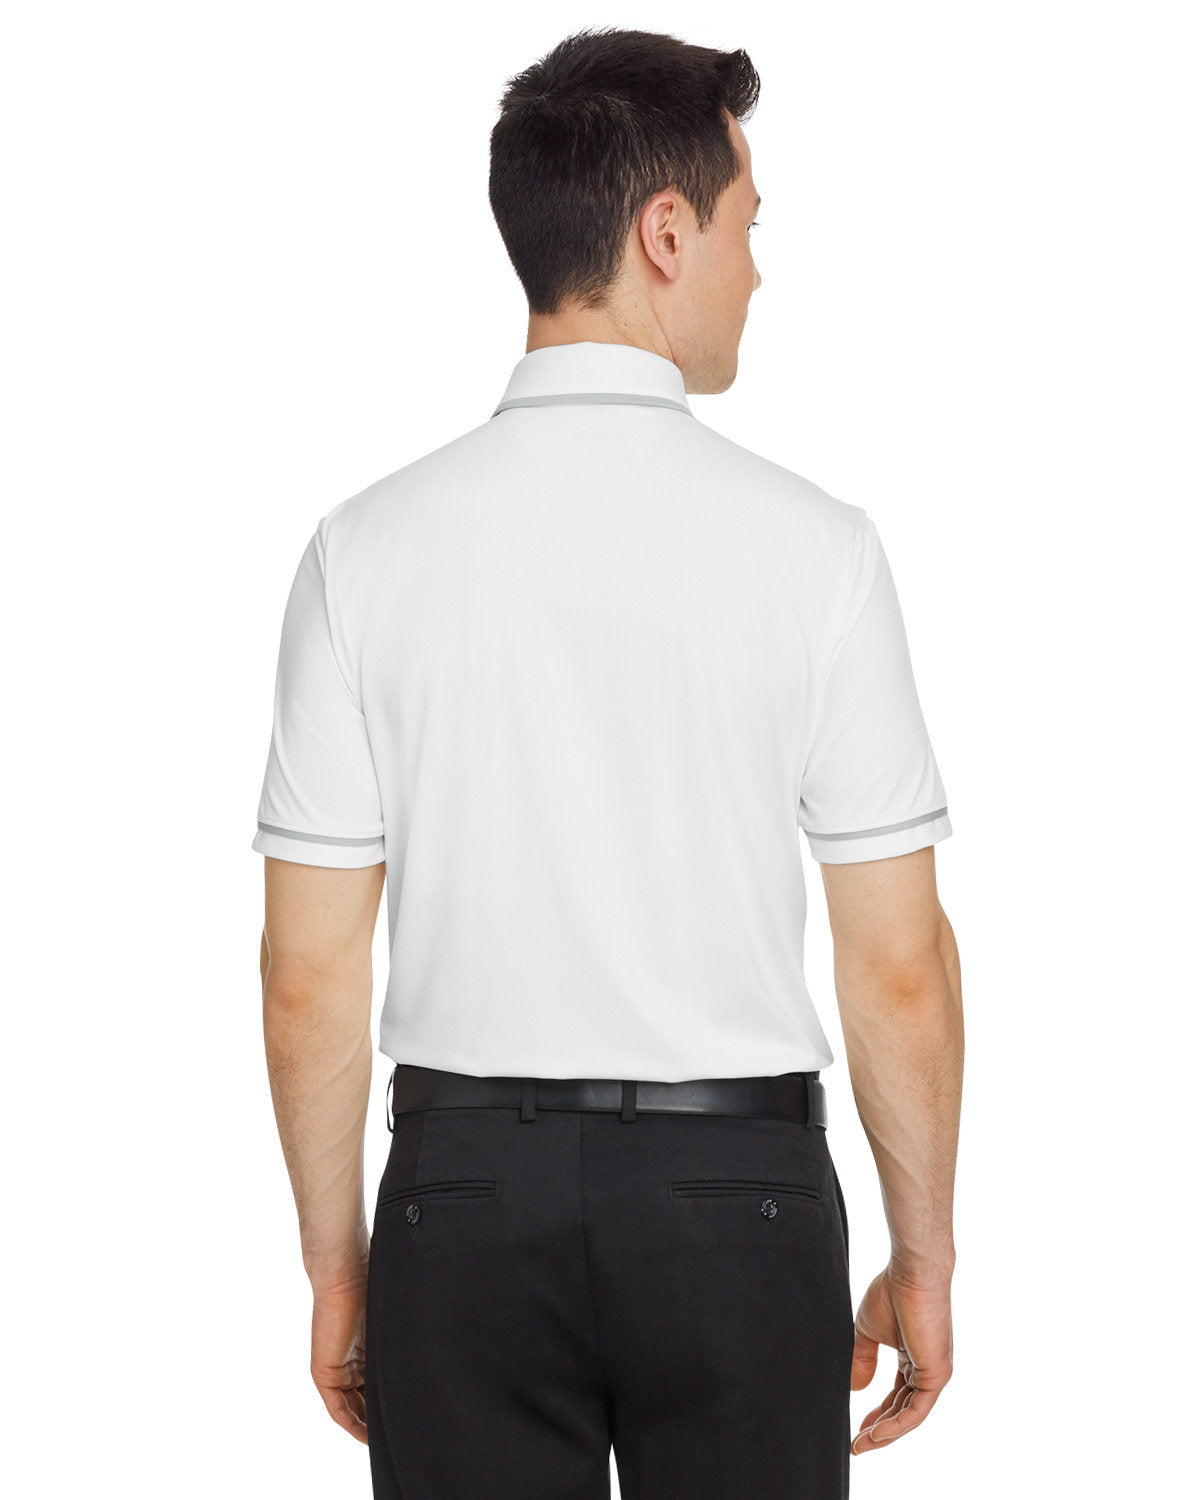 Under Armour Men's Tipped Teams Performance Polo, White